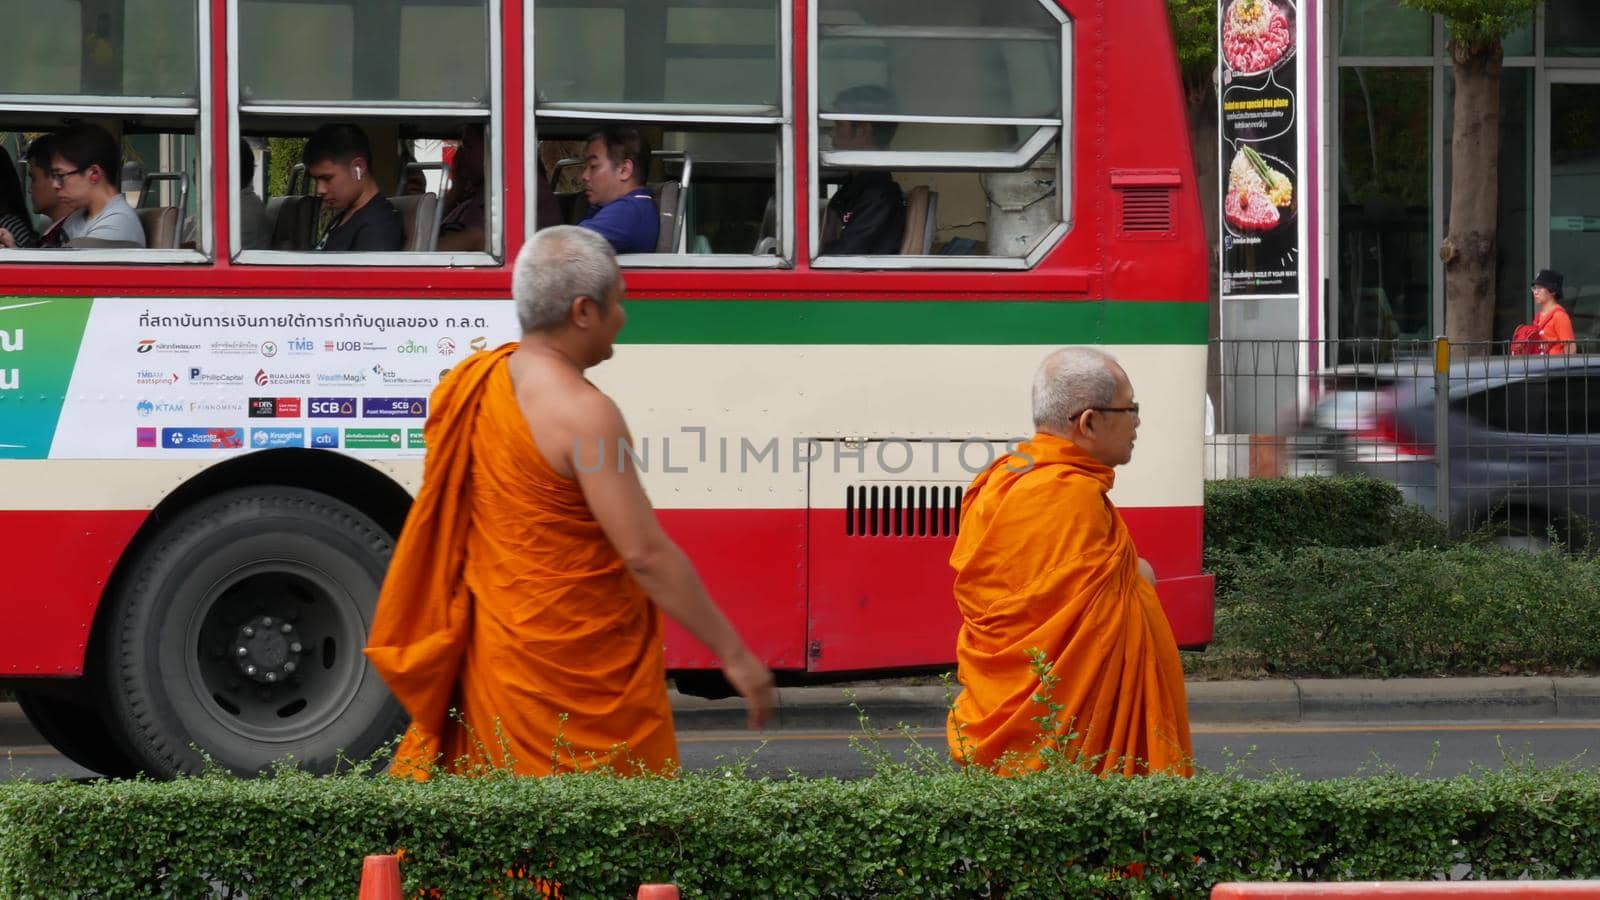 BANGKOK, THAILAND - 13 JULY, 2019: Buddhist holy Monk in traditional orange robe on the steet. Monks yellow religious clothes among people near the road looking for taxi transport. Urban city life